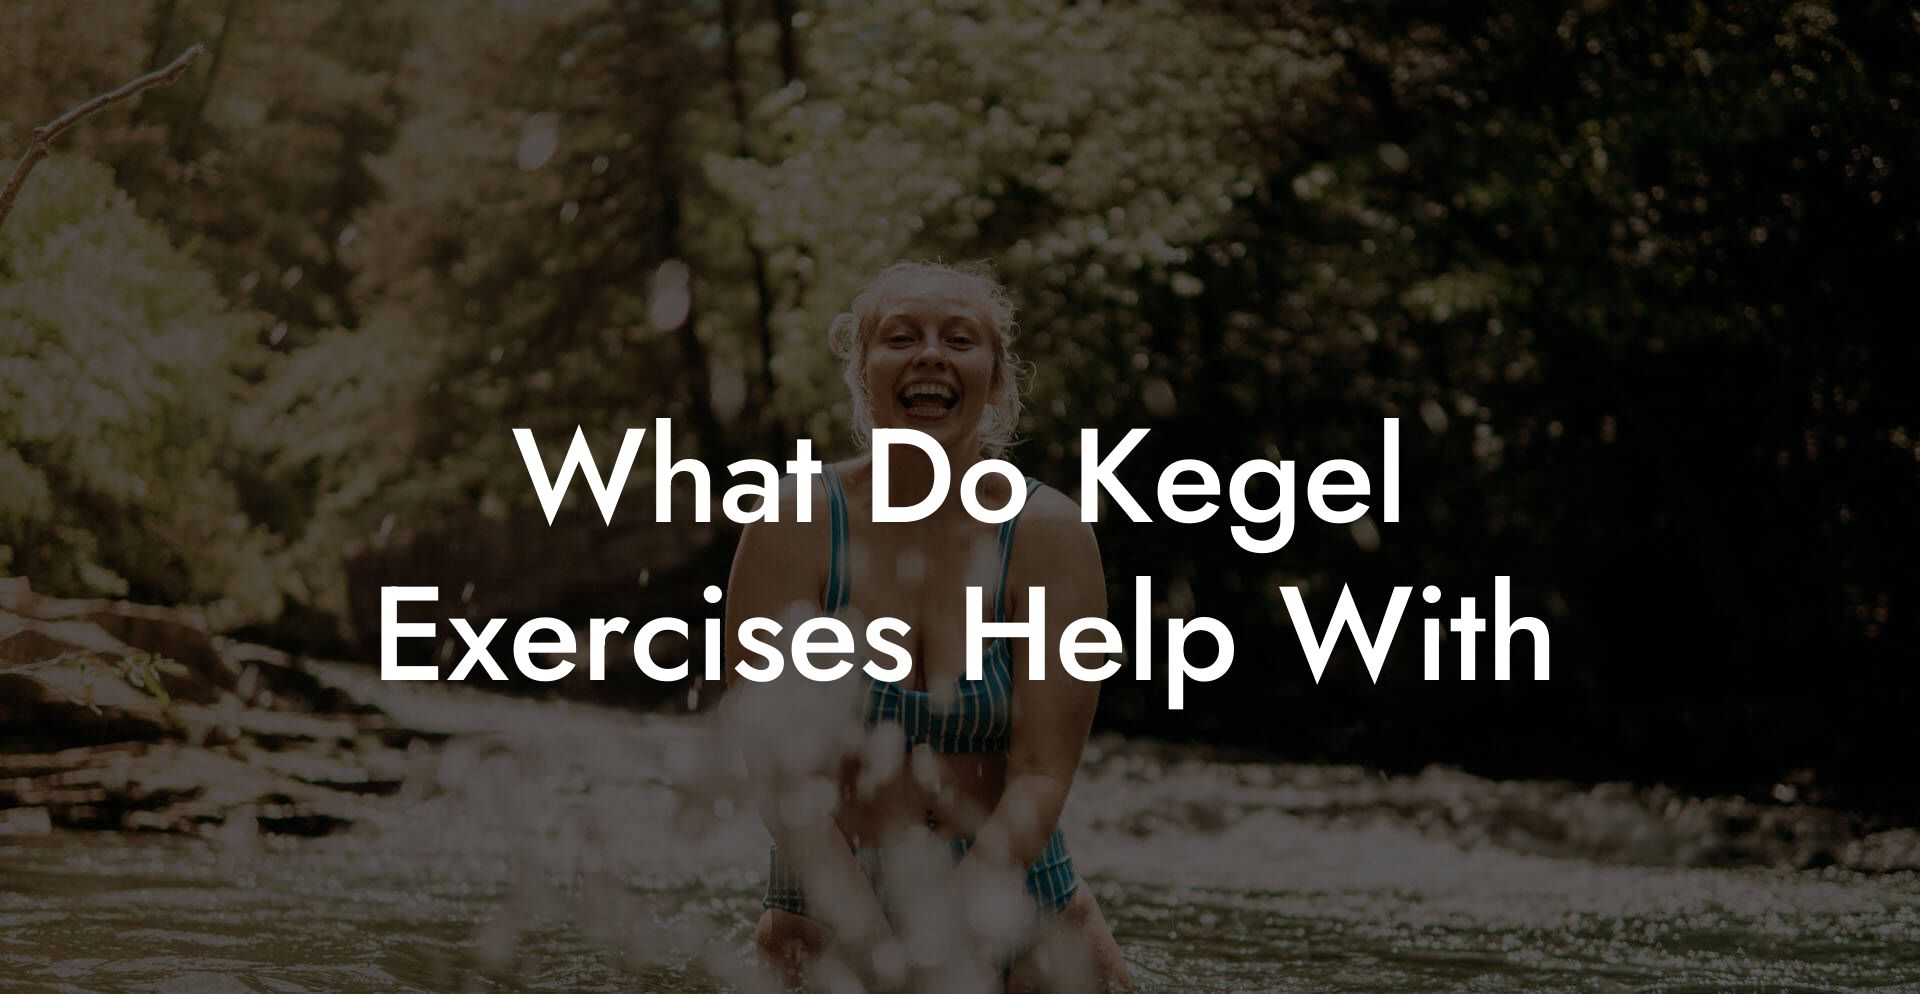 What Do Kegel Exercises Help With